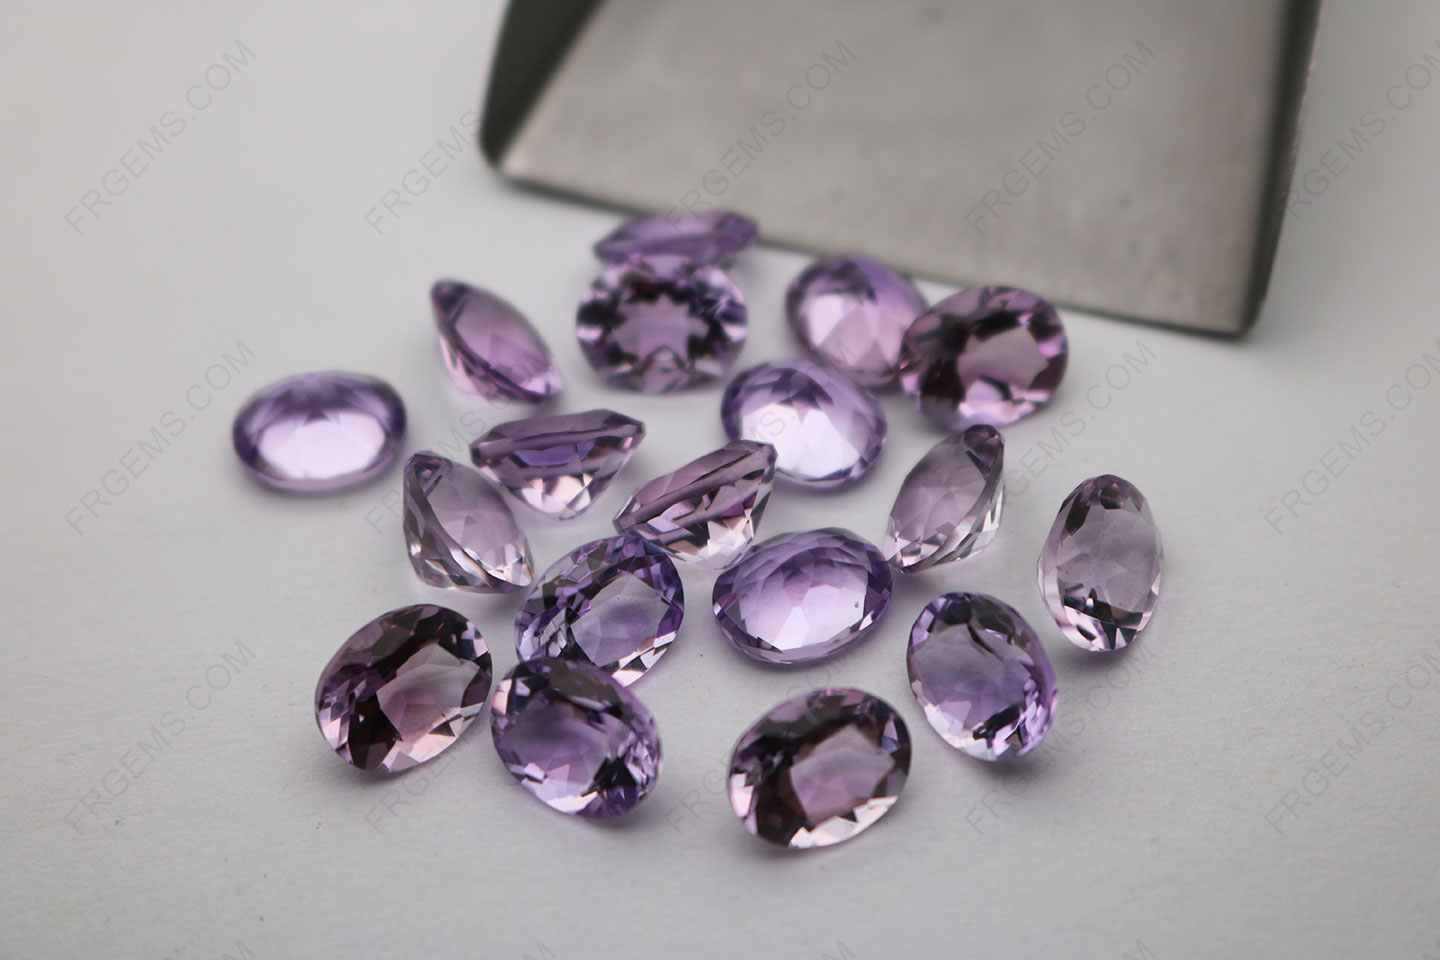 Wholesale Natural Genuine Rose Amethyst Color Oval Shape Faceted cut 10x8mm gemstones from China